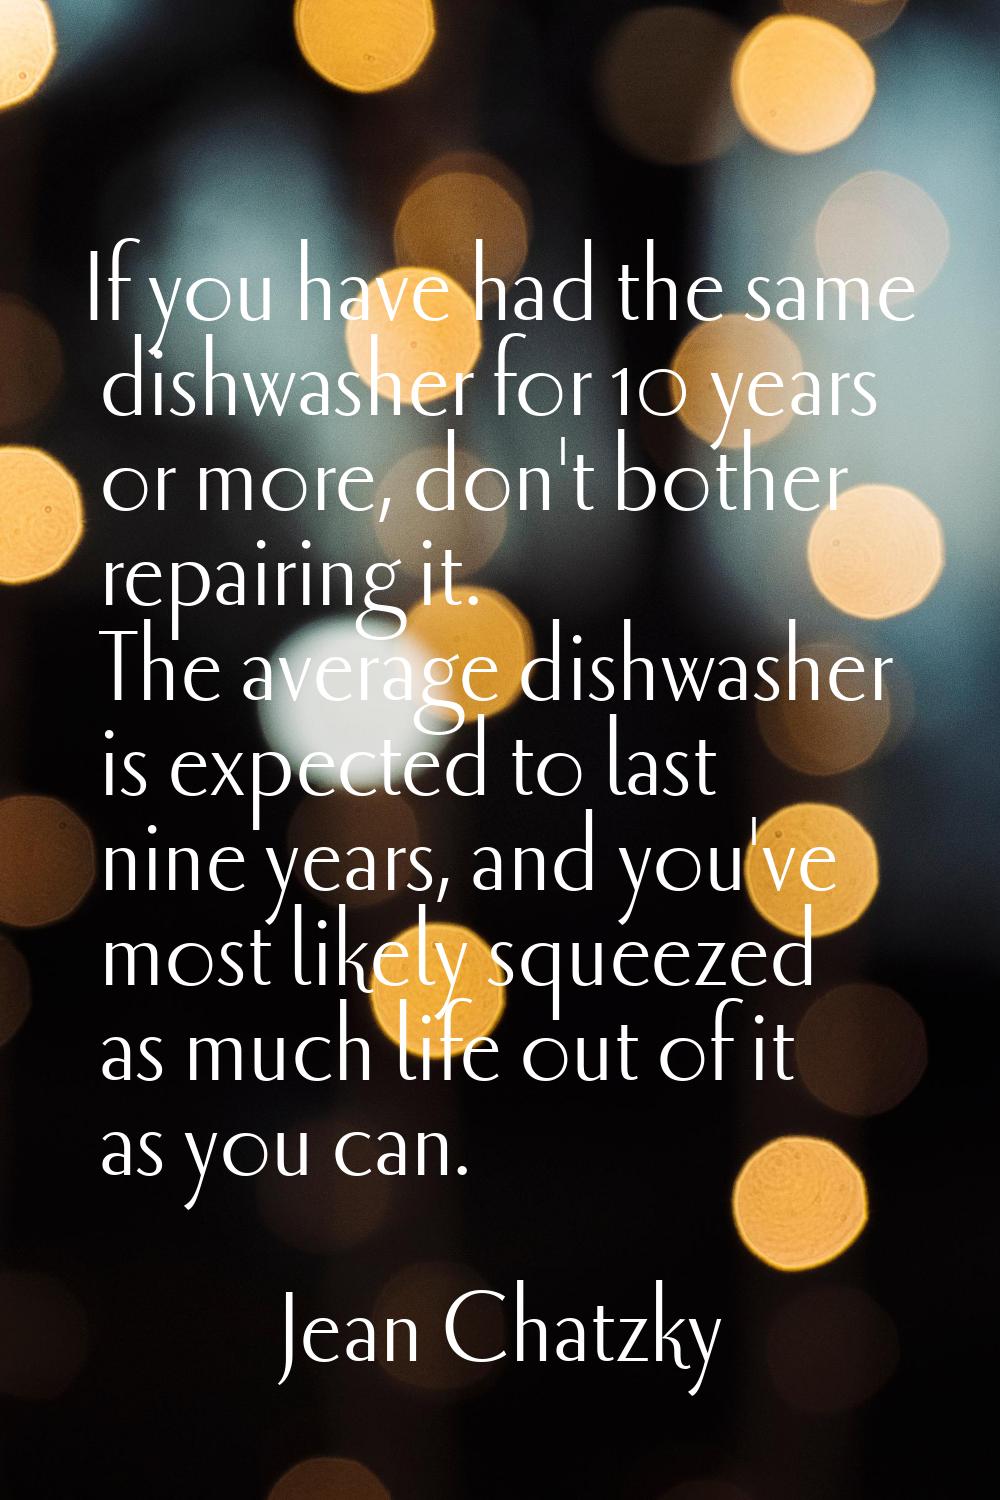 If you have had the same dishwasher for 10 years or more, don't bother repairing it. The average di